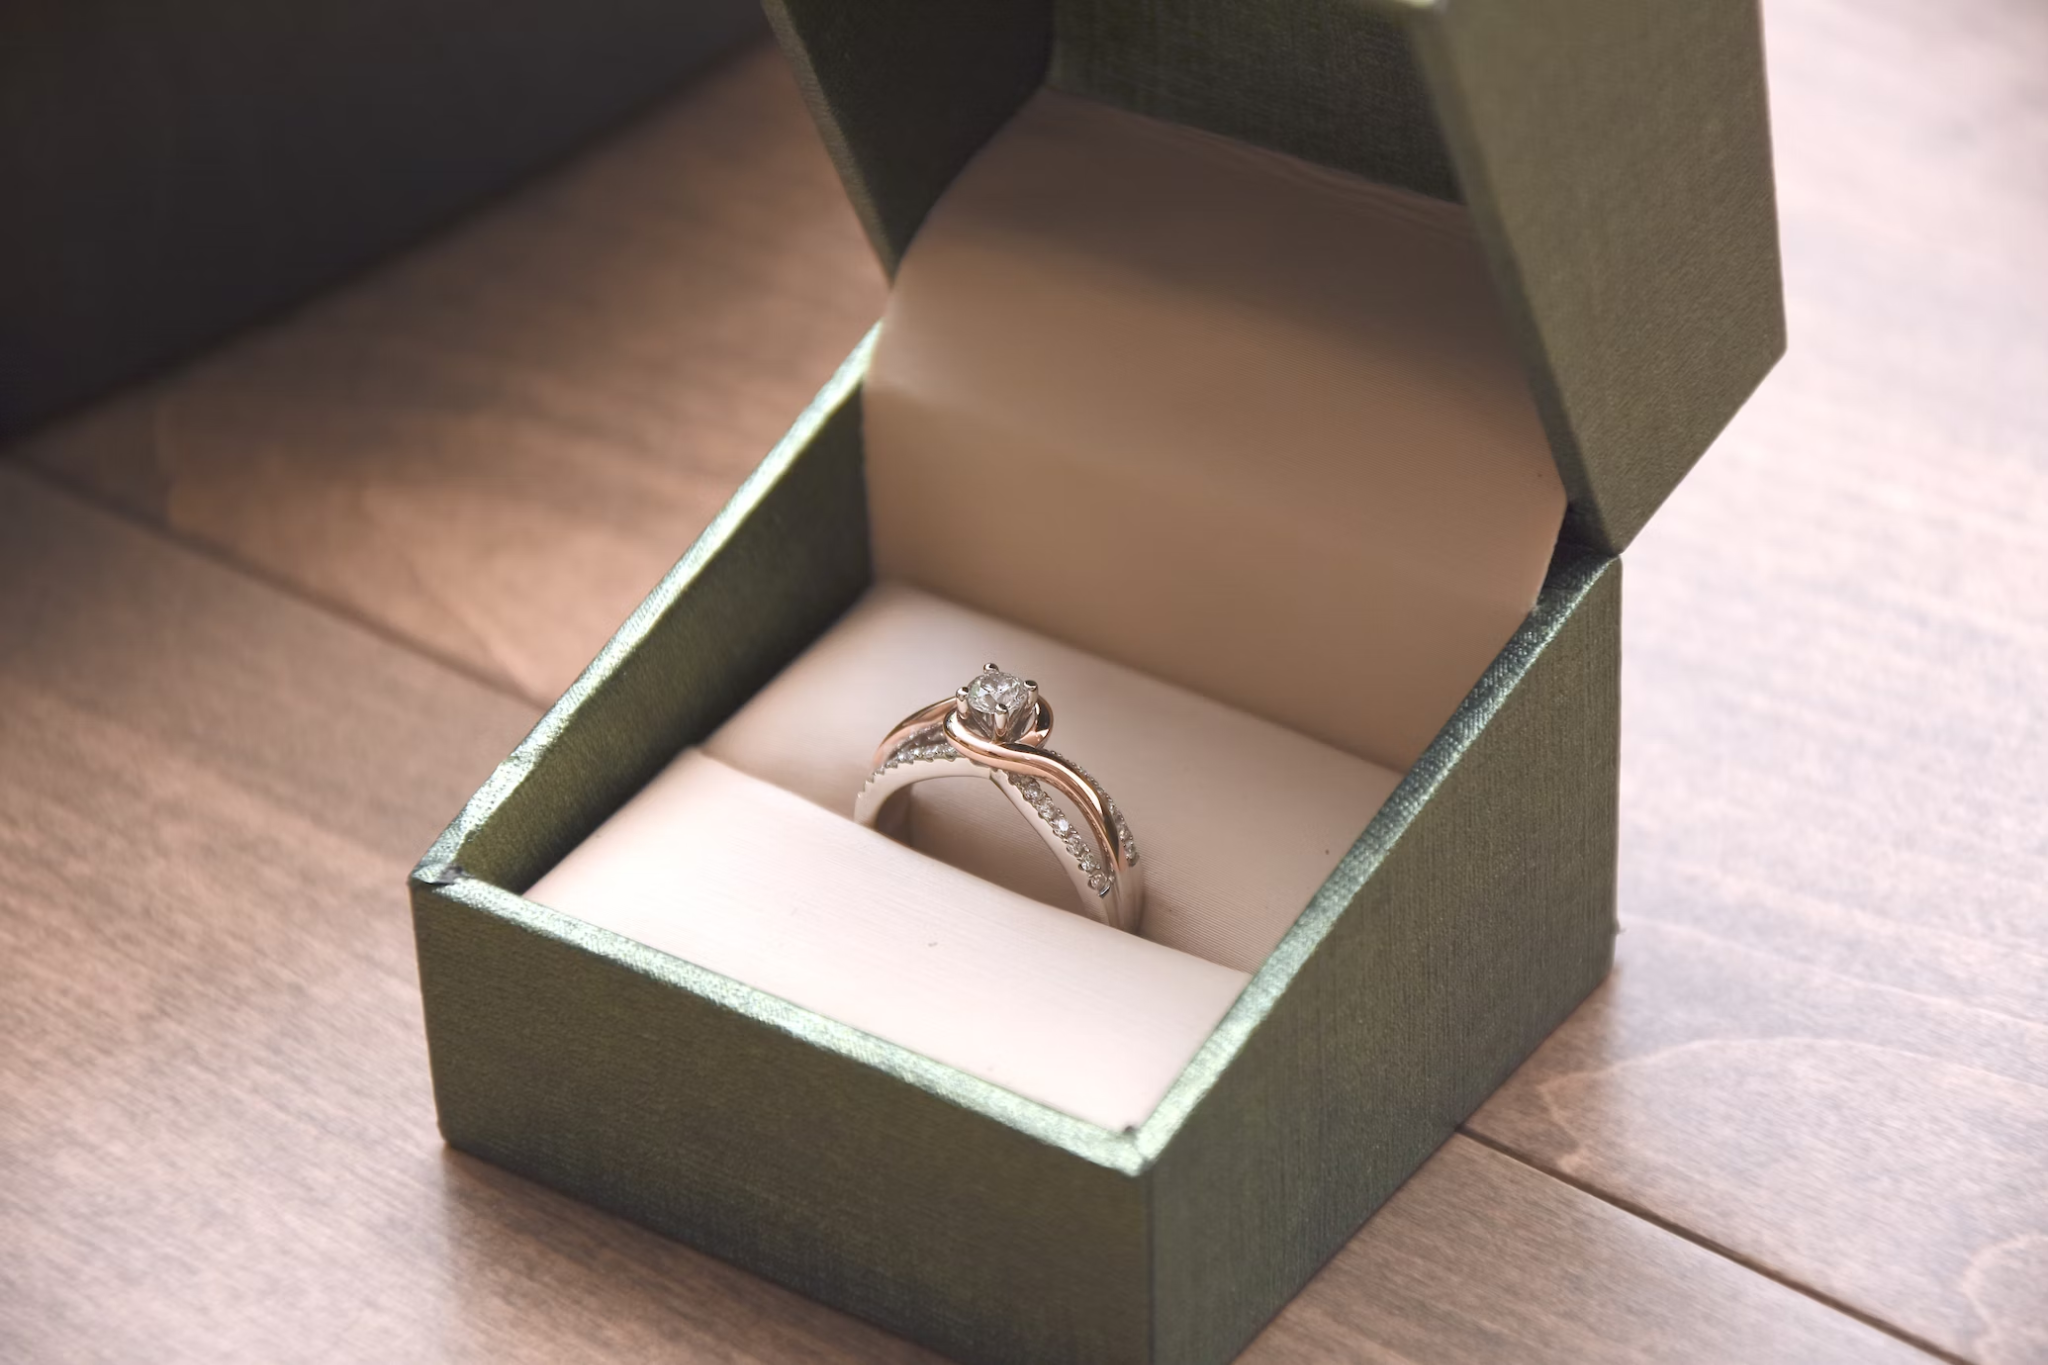 These Tech Advancements Make Ring Shopping Easier than Ever